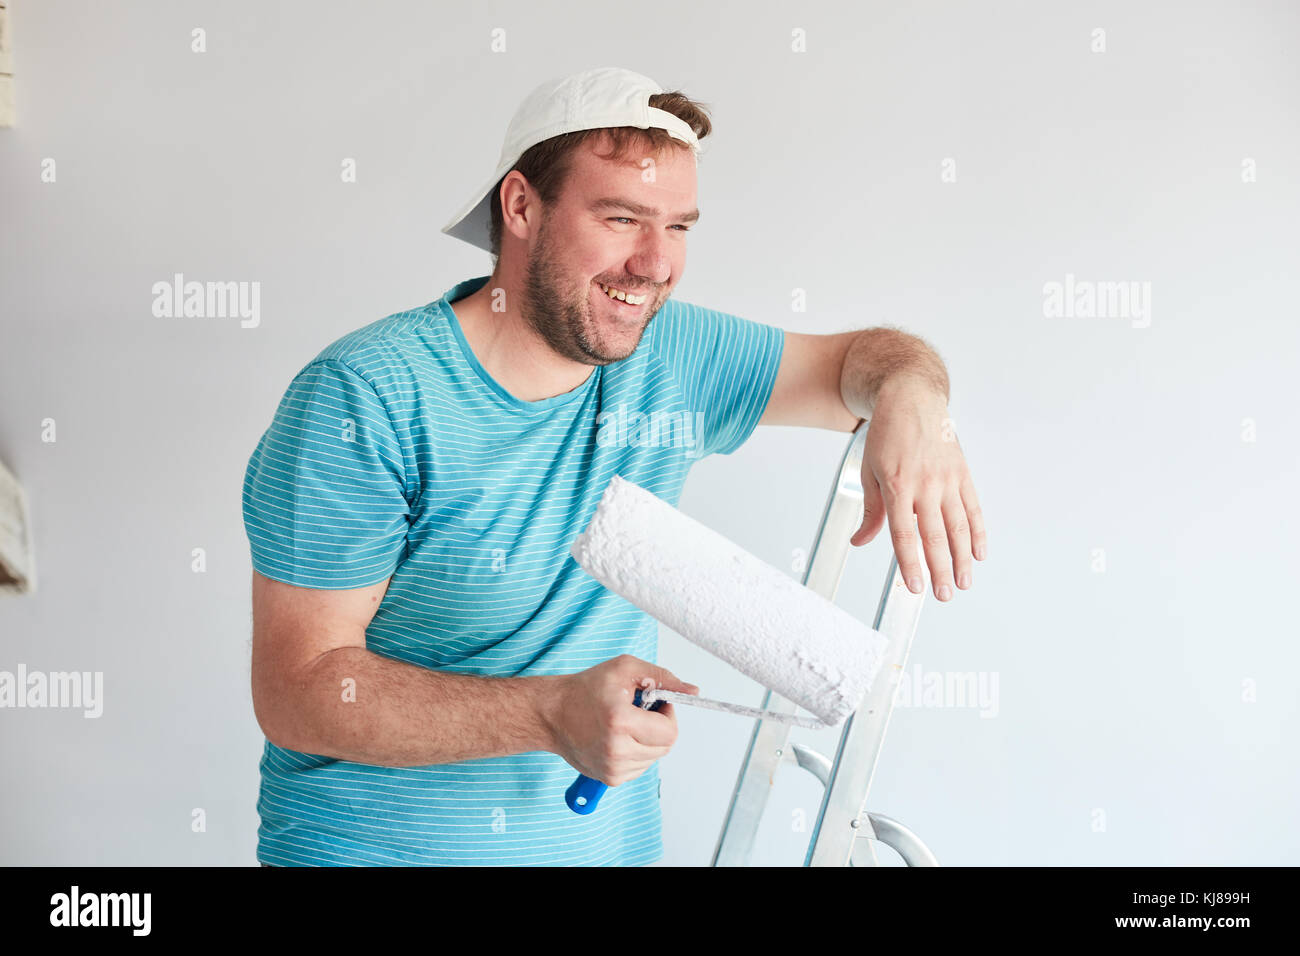 Smiling man holding a roller in front of him Stock Photo